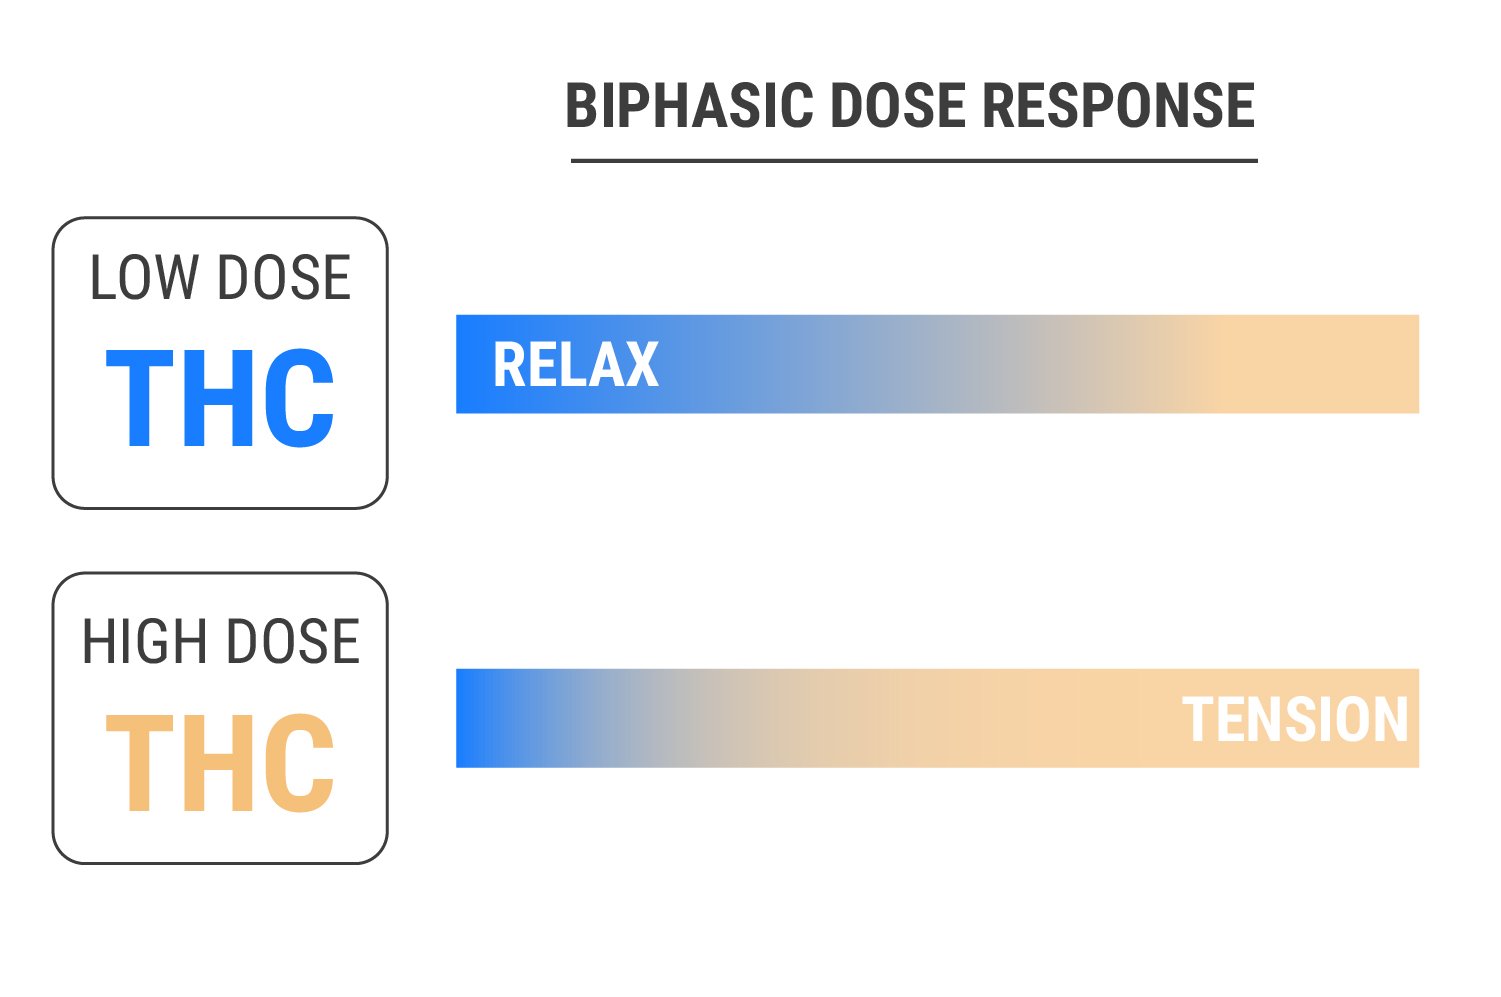 THC and the Biphasic Dose Response